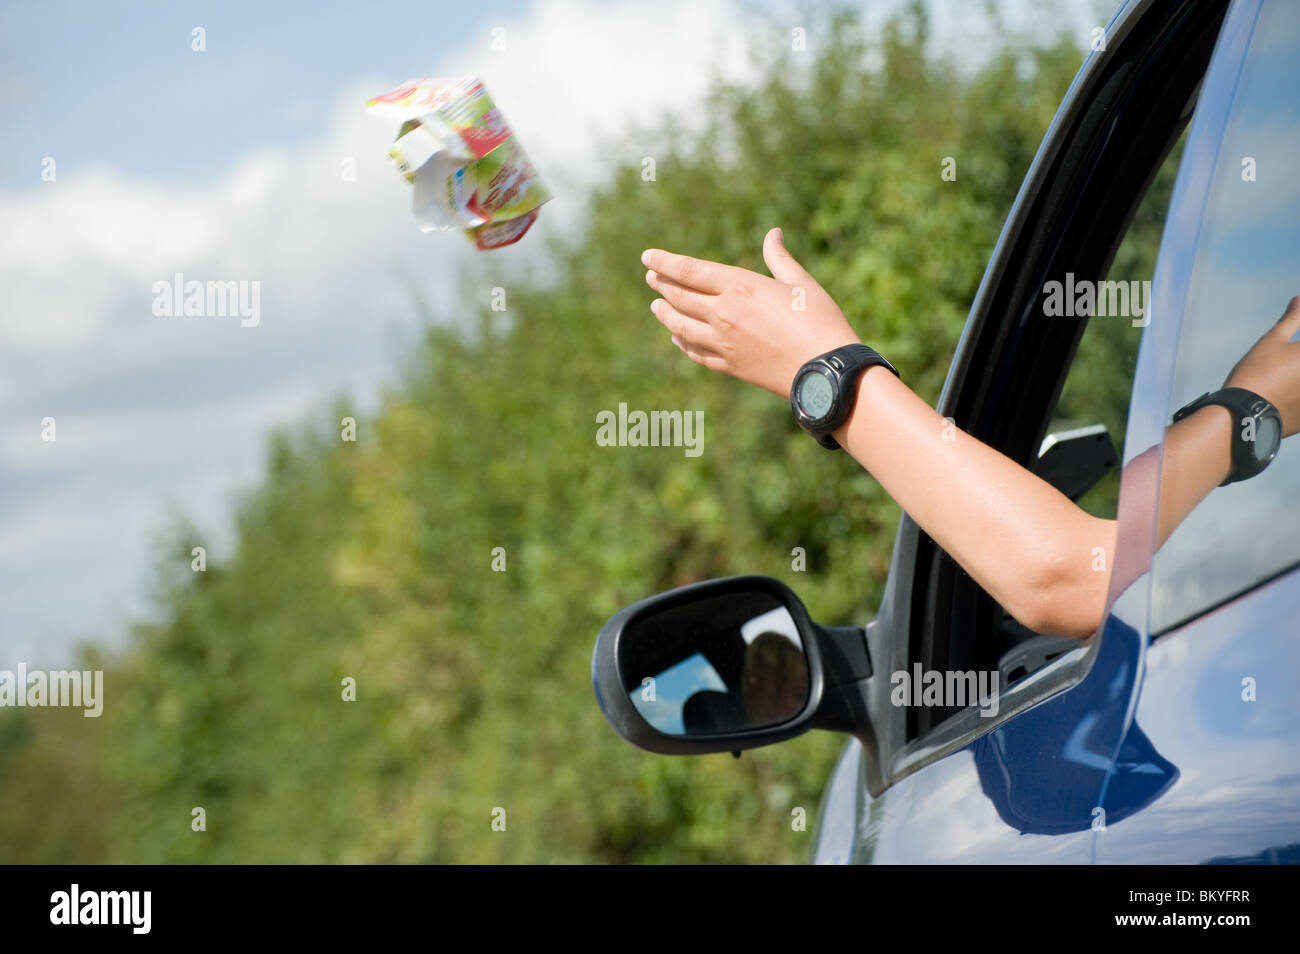 Somebody throwing litter out of a car window. Stock Photo